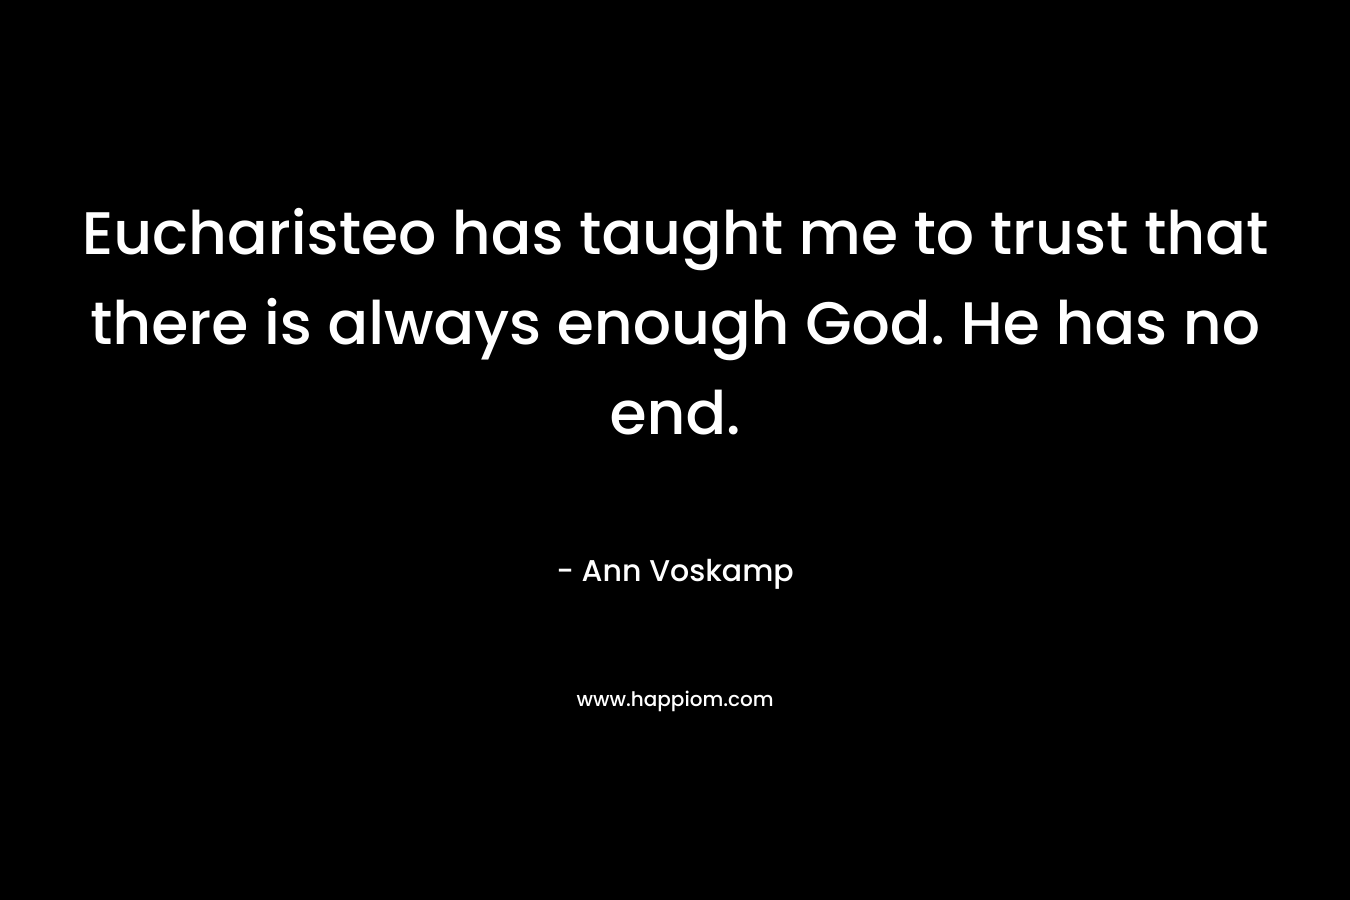 Eucharisteo has taught me to trust that there is always enough God. He has no end. – Ann Voskamp